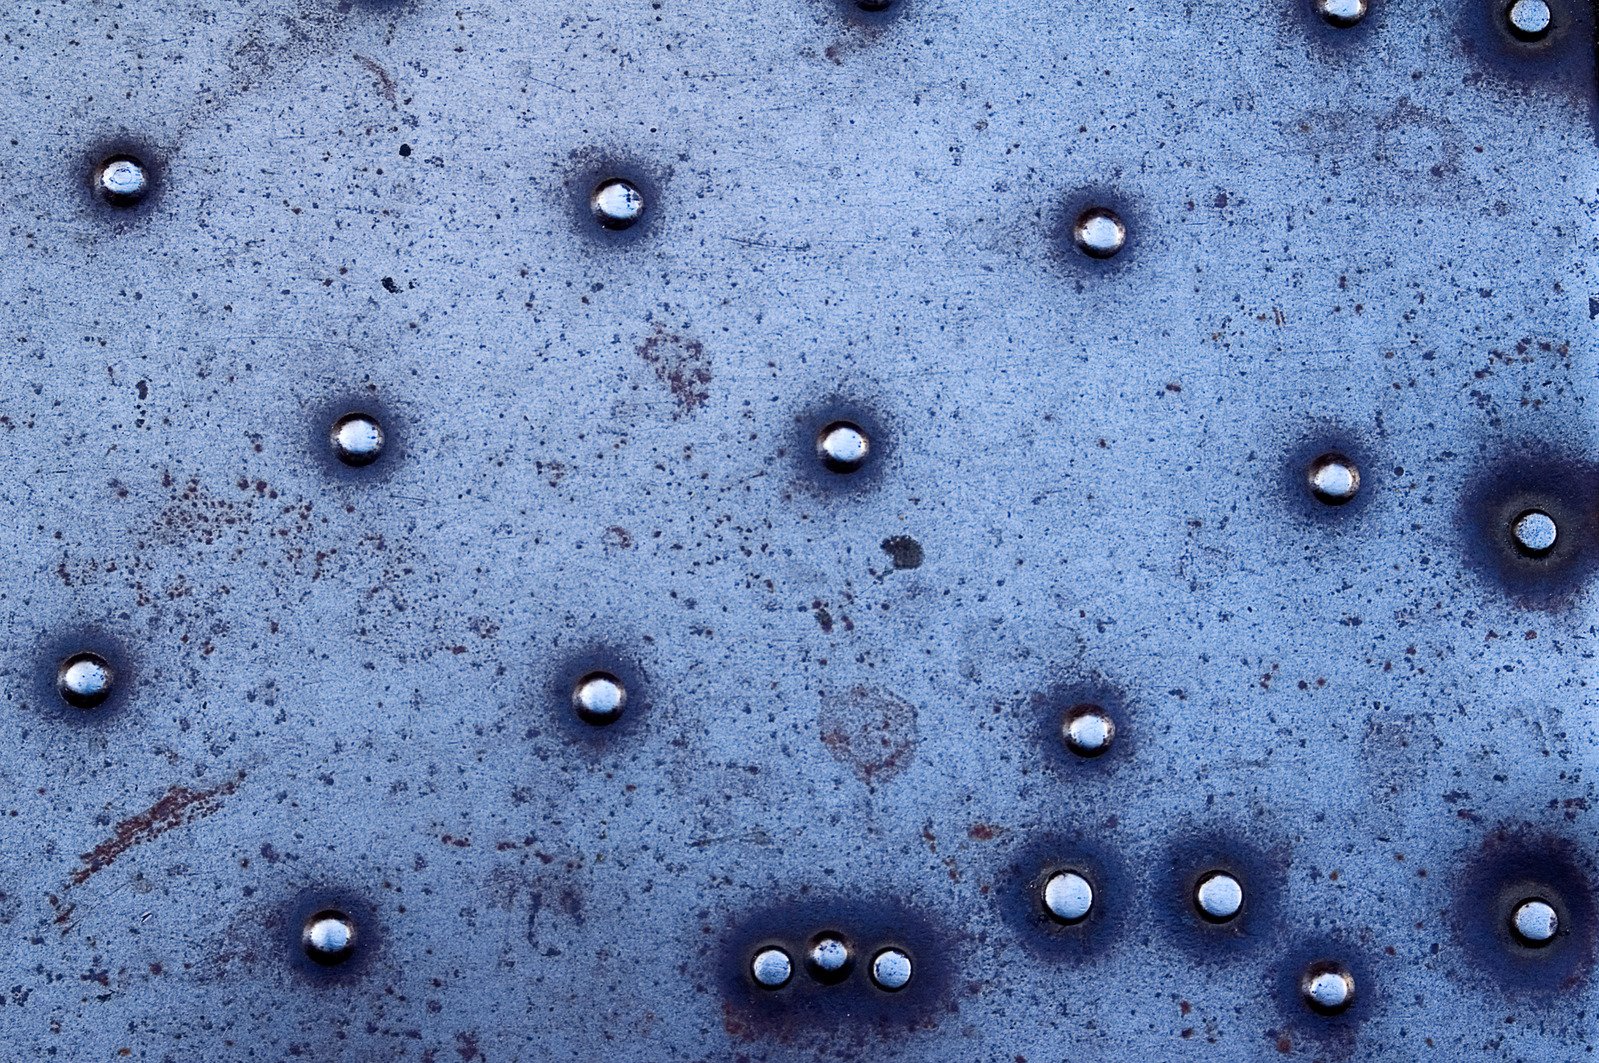 multiple metal balls and holes in an old surface